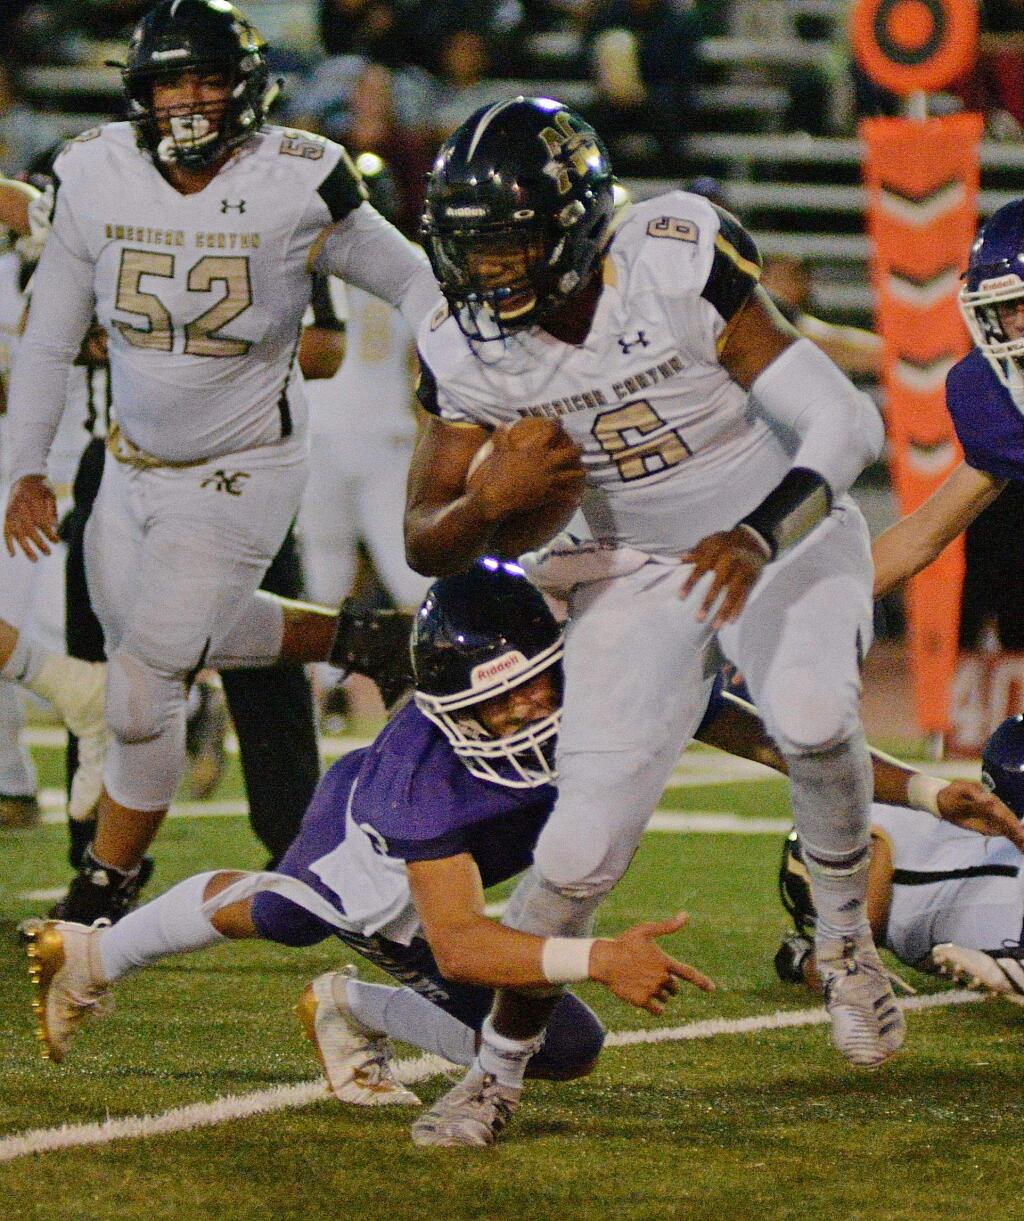 Petaluma's Jack Hartman makes an ankle tackle on American Canyon's 210-pound quarterback Vance Eshenburg in the the VVAL opening game won by American Canyon, 34-0. (Argus-Courier)